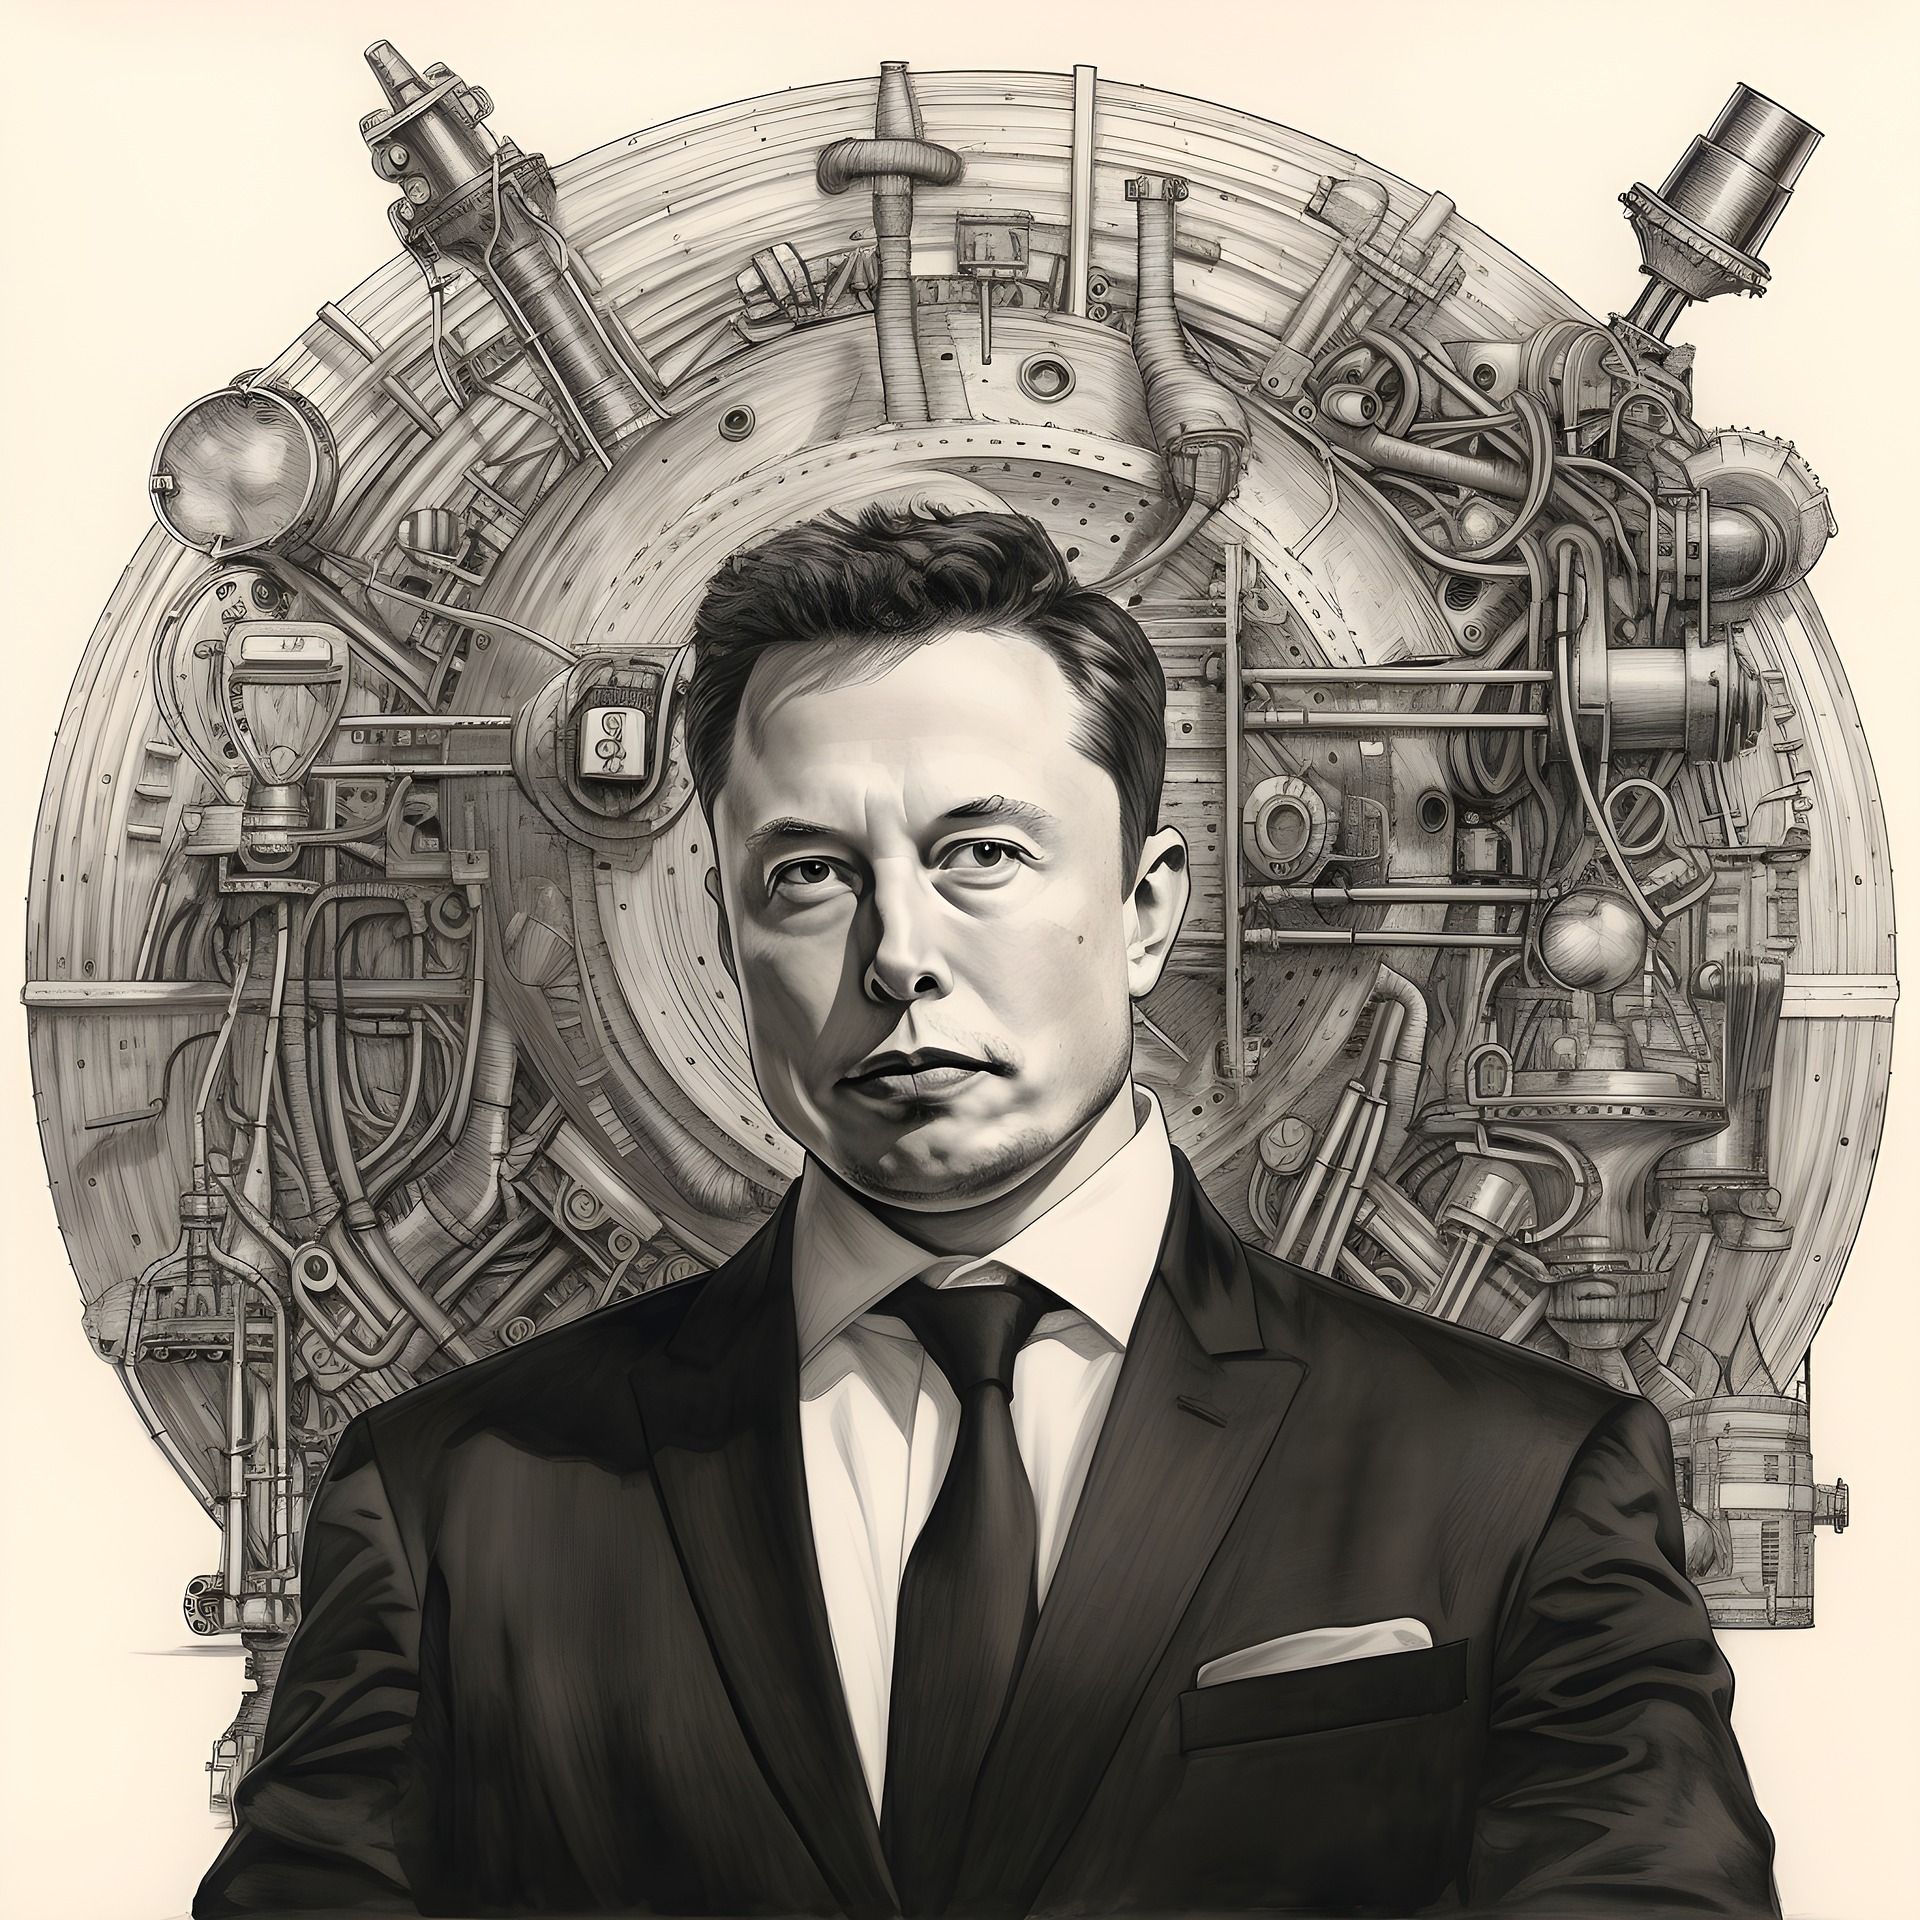 Elon Musk thinks AI could bring wealth but also existential risks